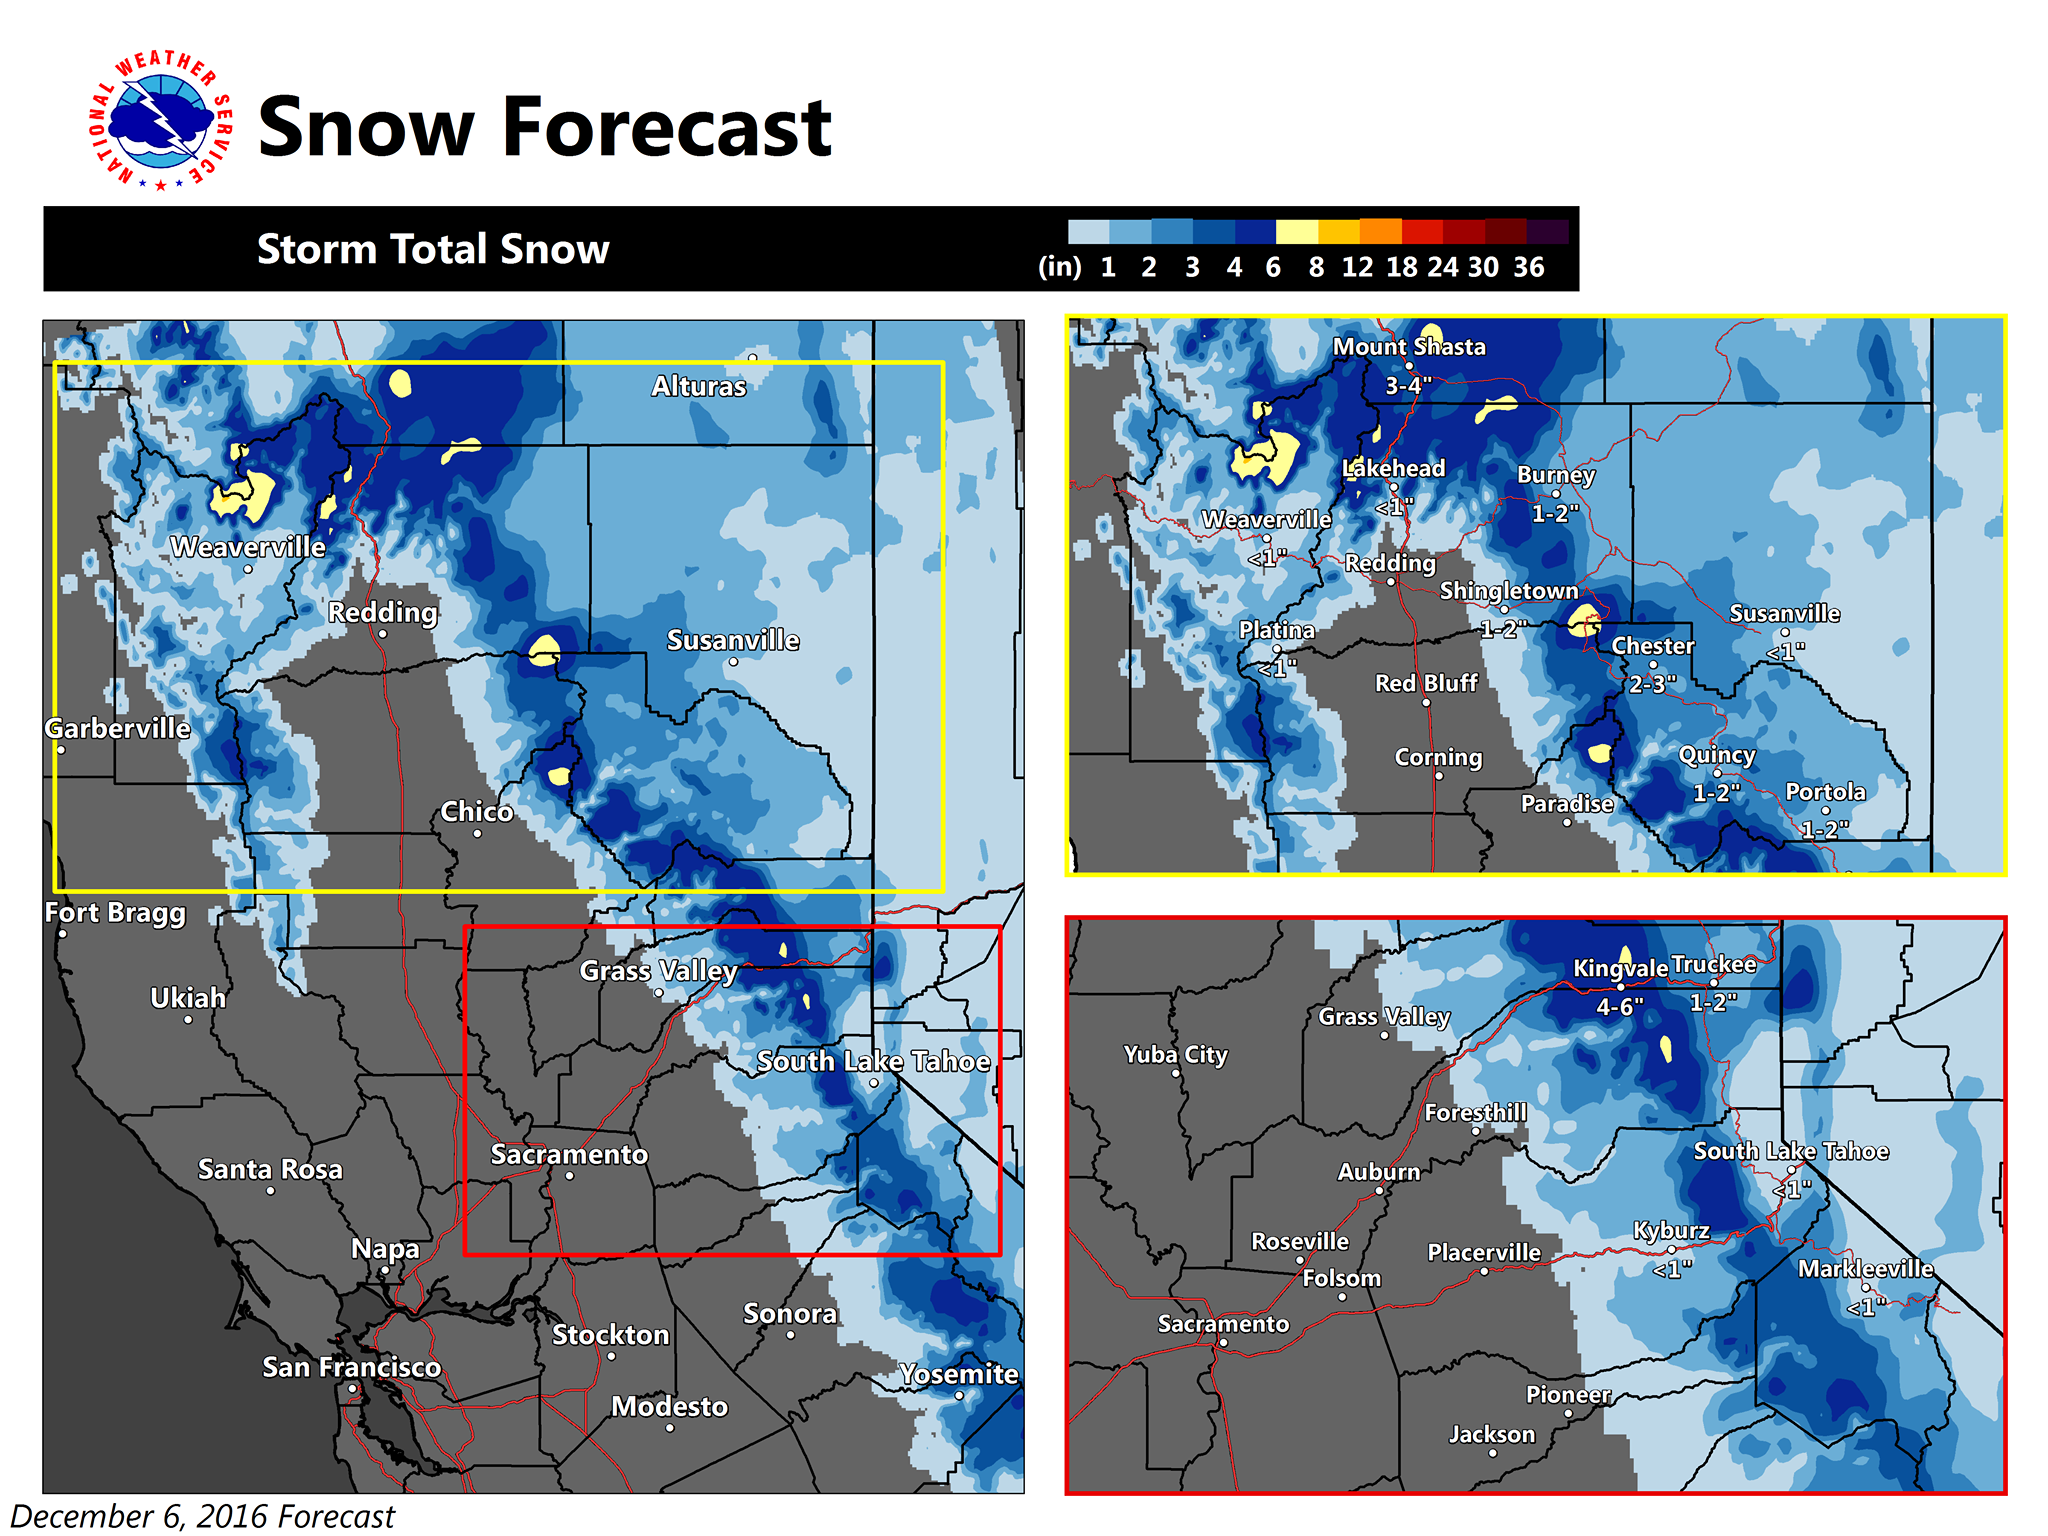 Snow Forecast for California today. image: noaa, today